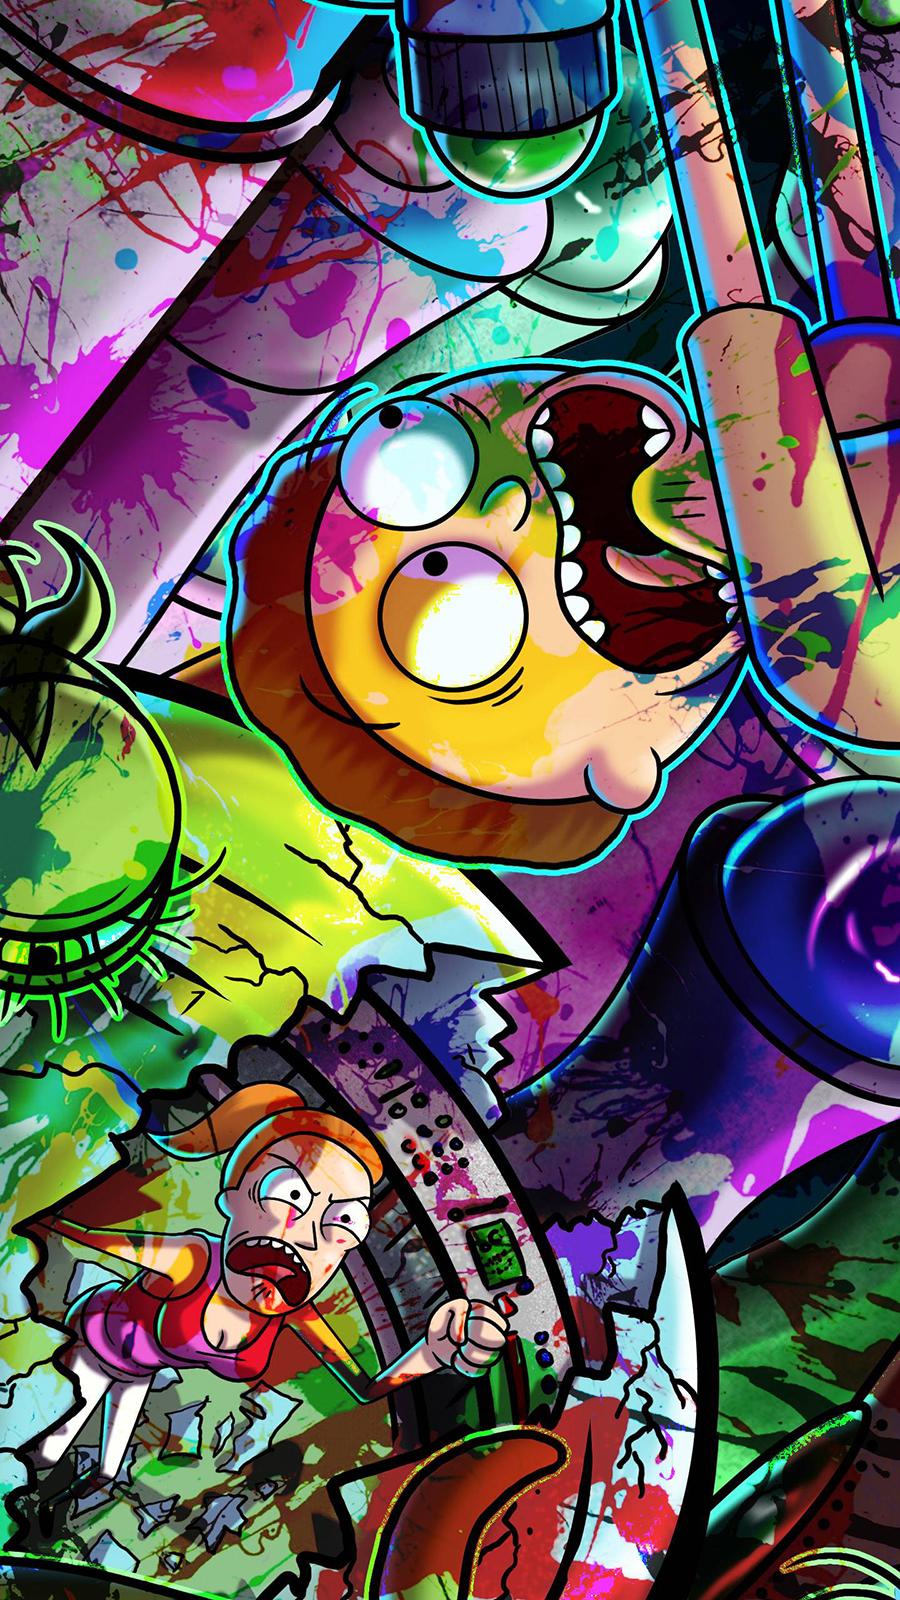 Rick & Morty Paint Wallpapers Free Download For Your Device